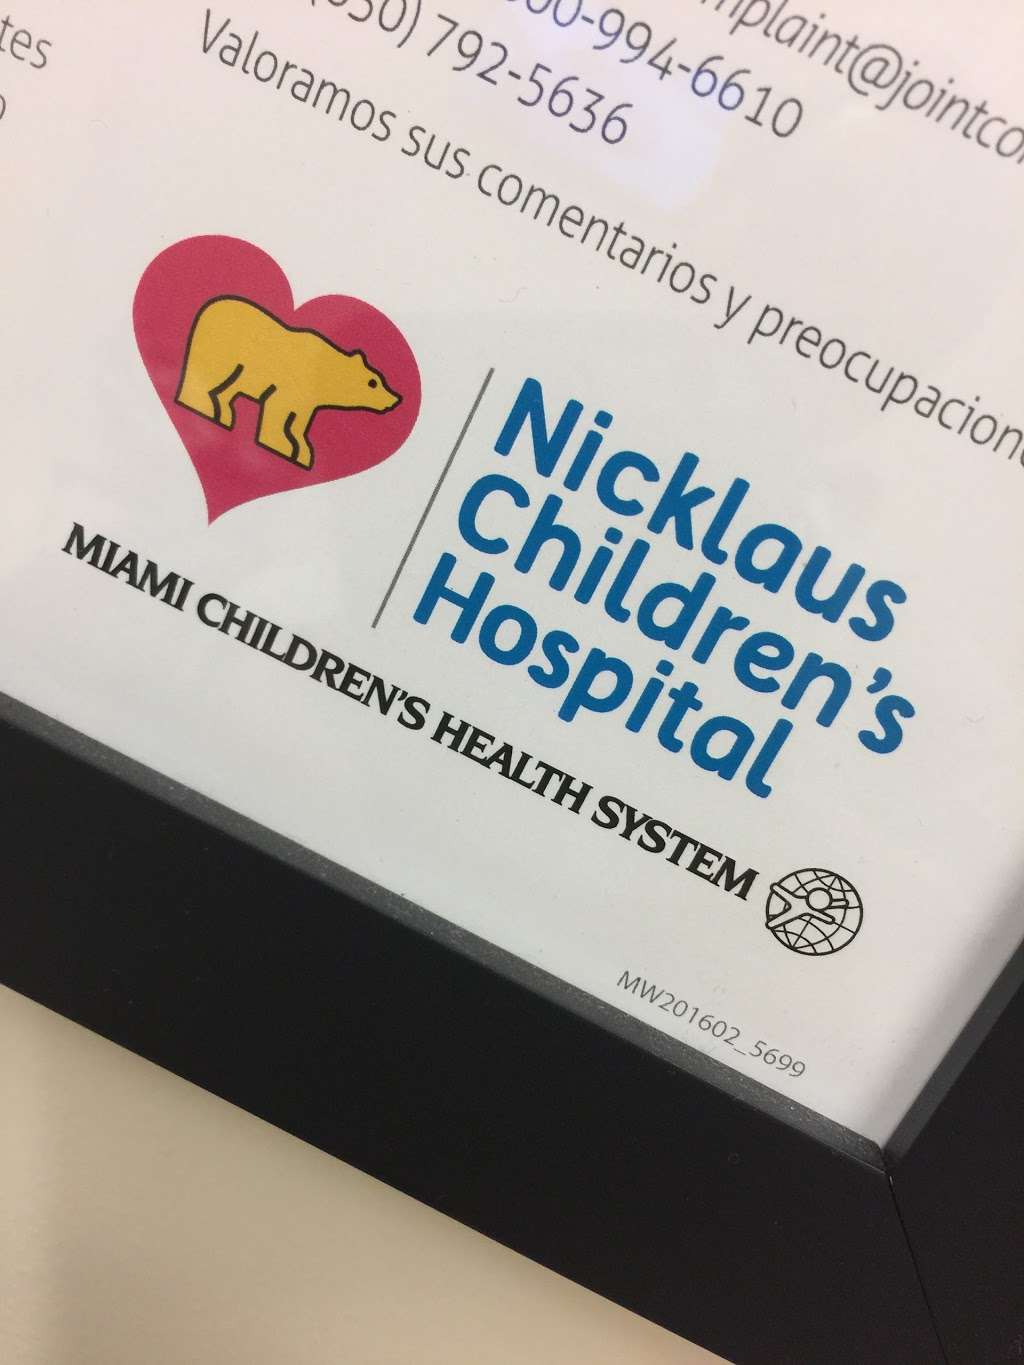 Nicklaus Childrens Miami Lakes Outpatient Center | 15025 NW 77th Ave, Miami Lakes, FL 33014 | Phone: (786) 313-7800